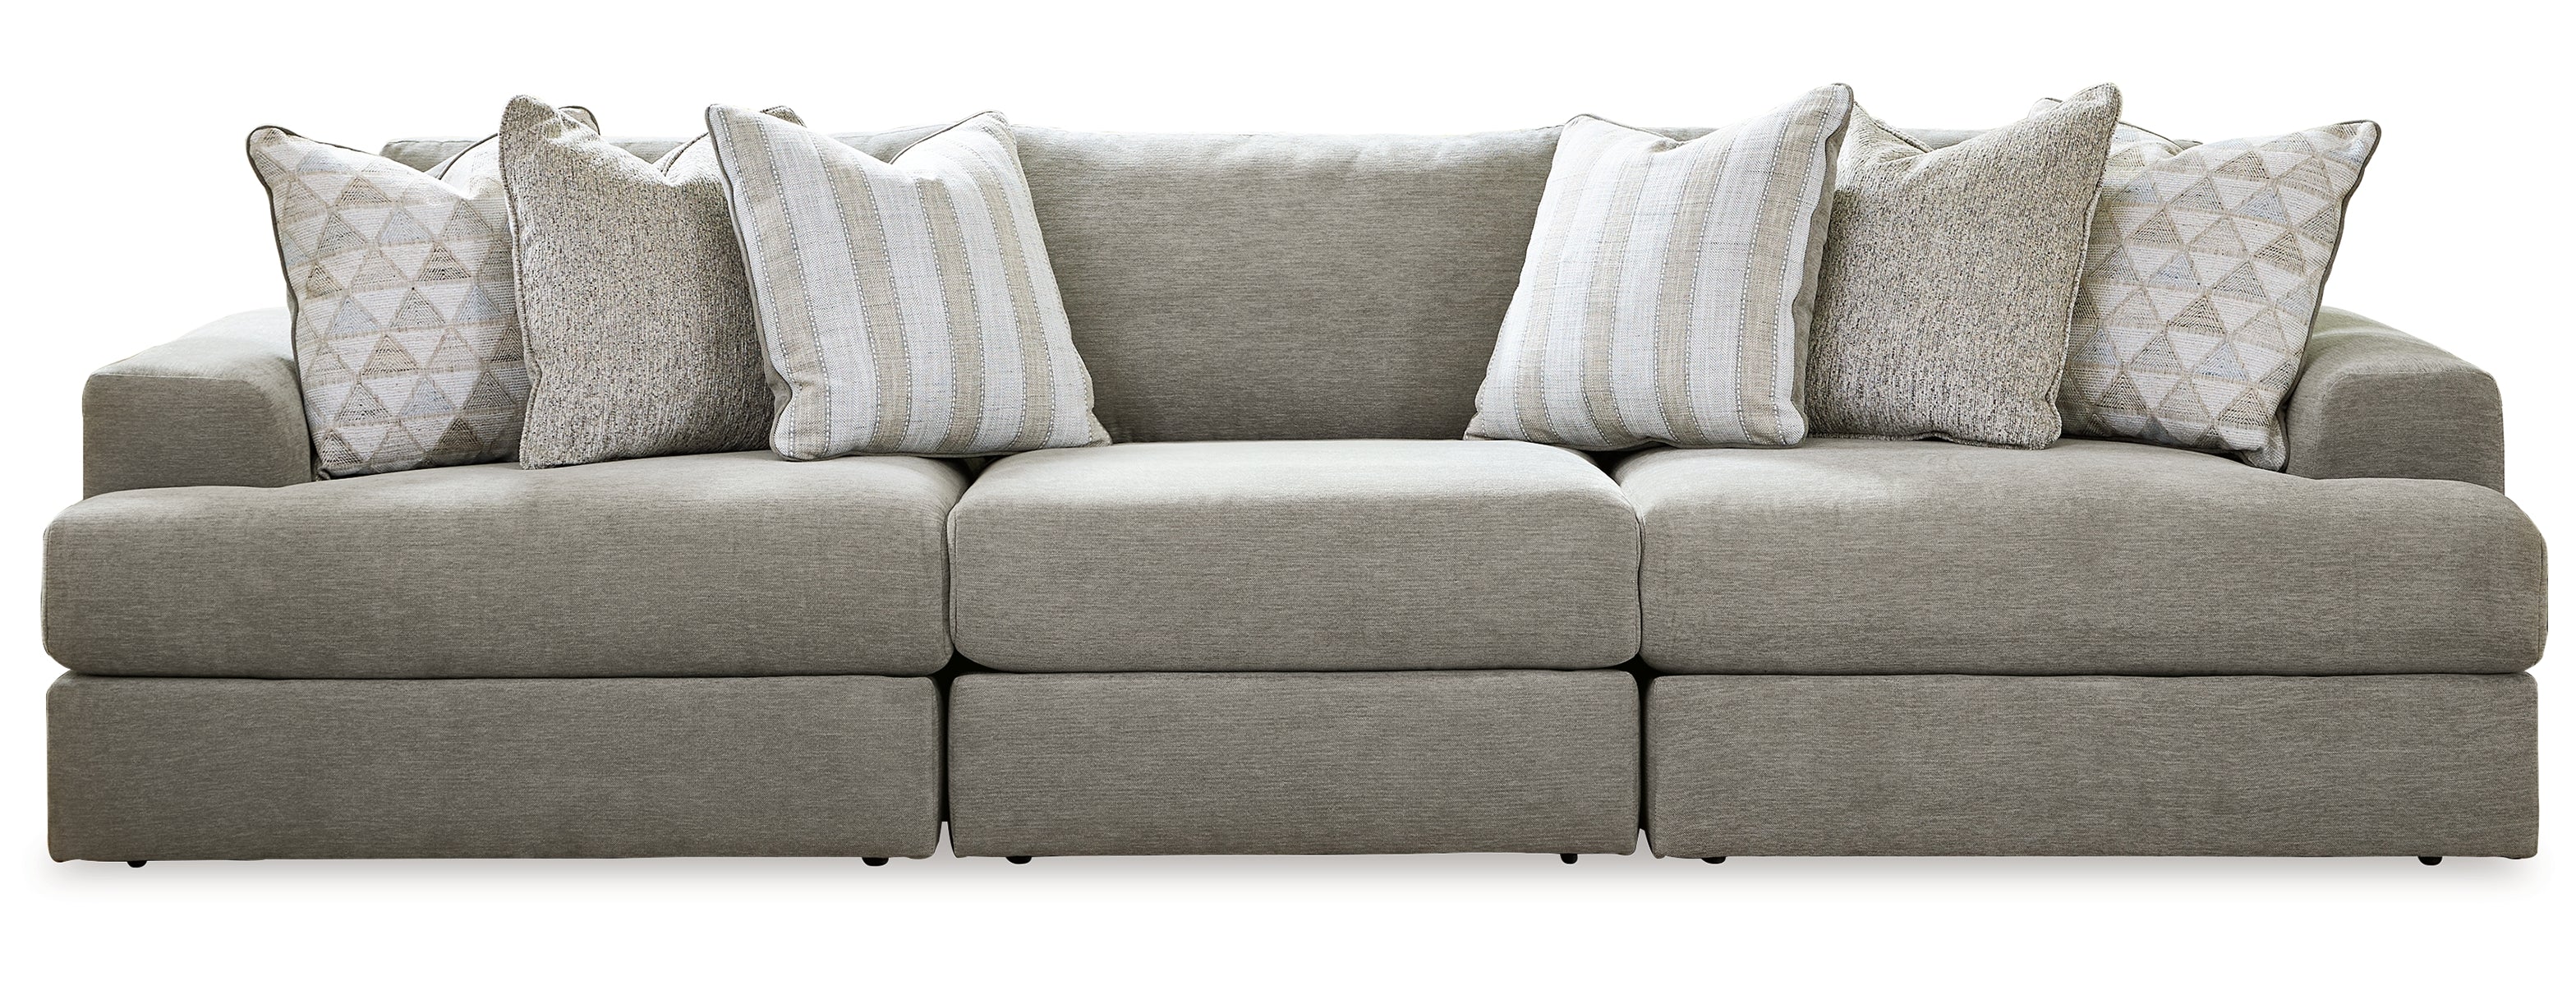 Avaliyah 3-Piece Sectional